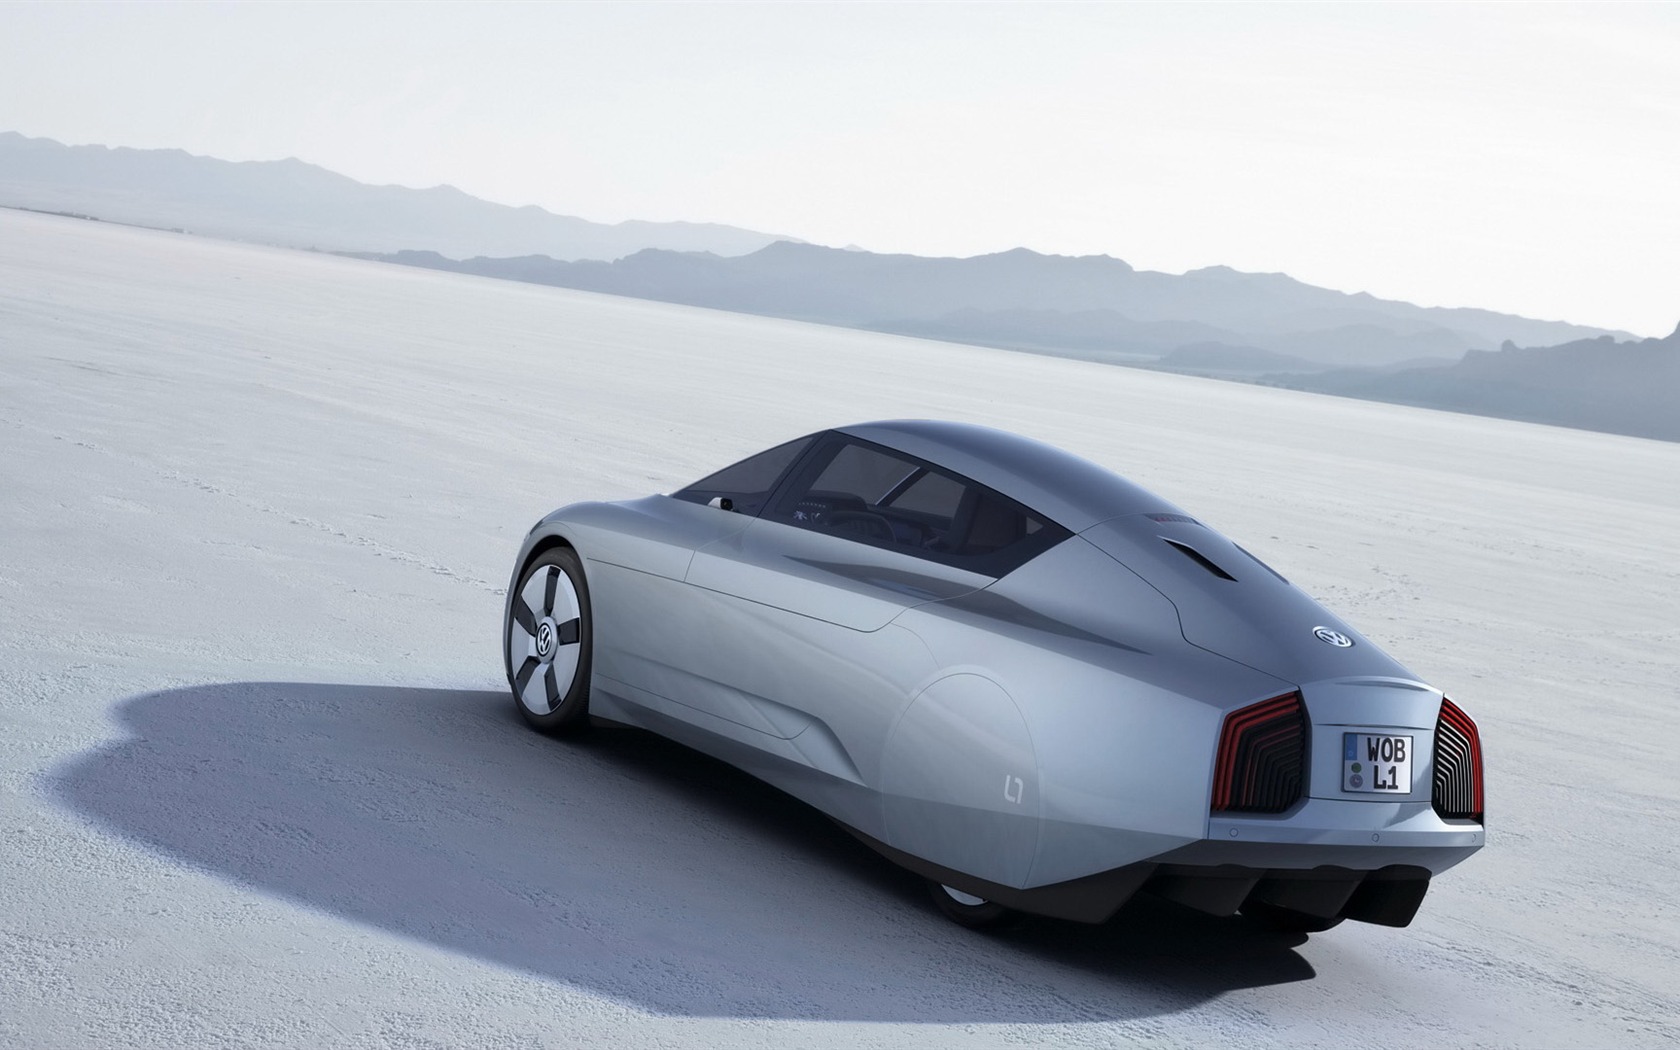 Volkswagen L1 Tapety Concept Car #15 - 1680x1050